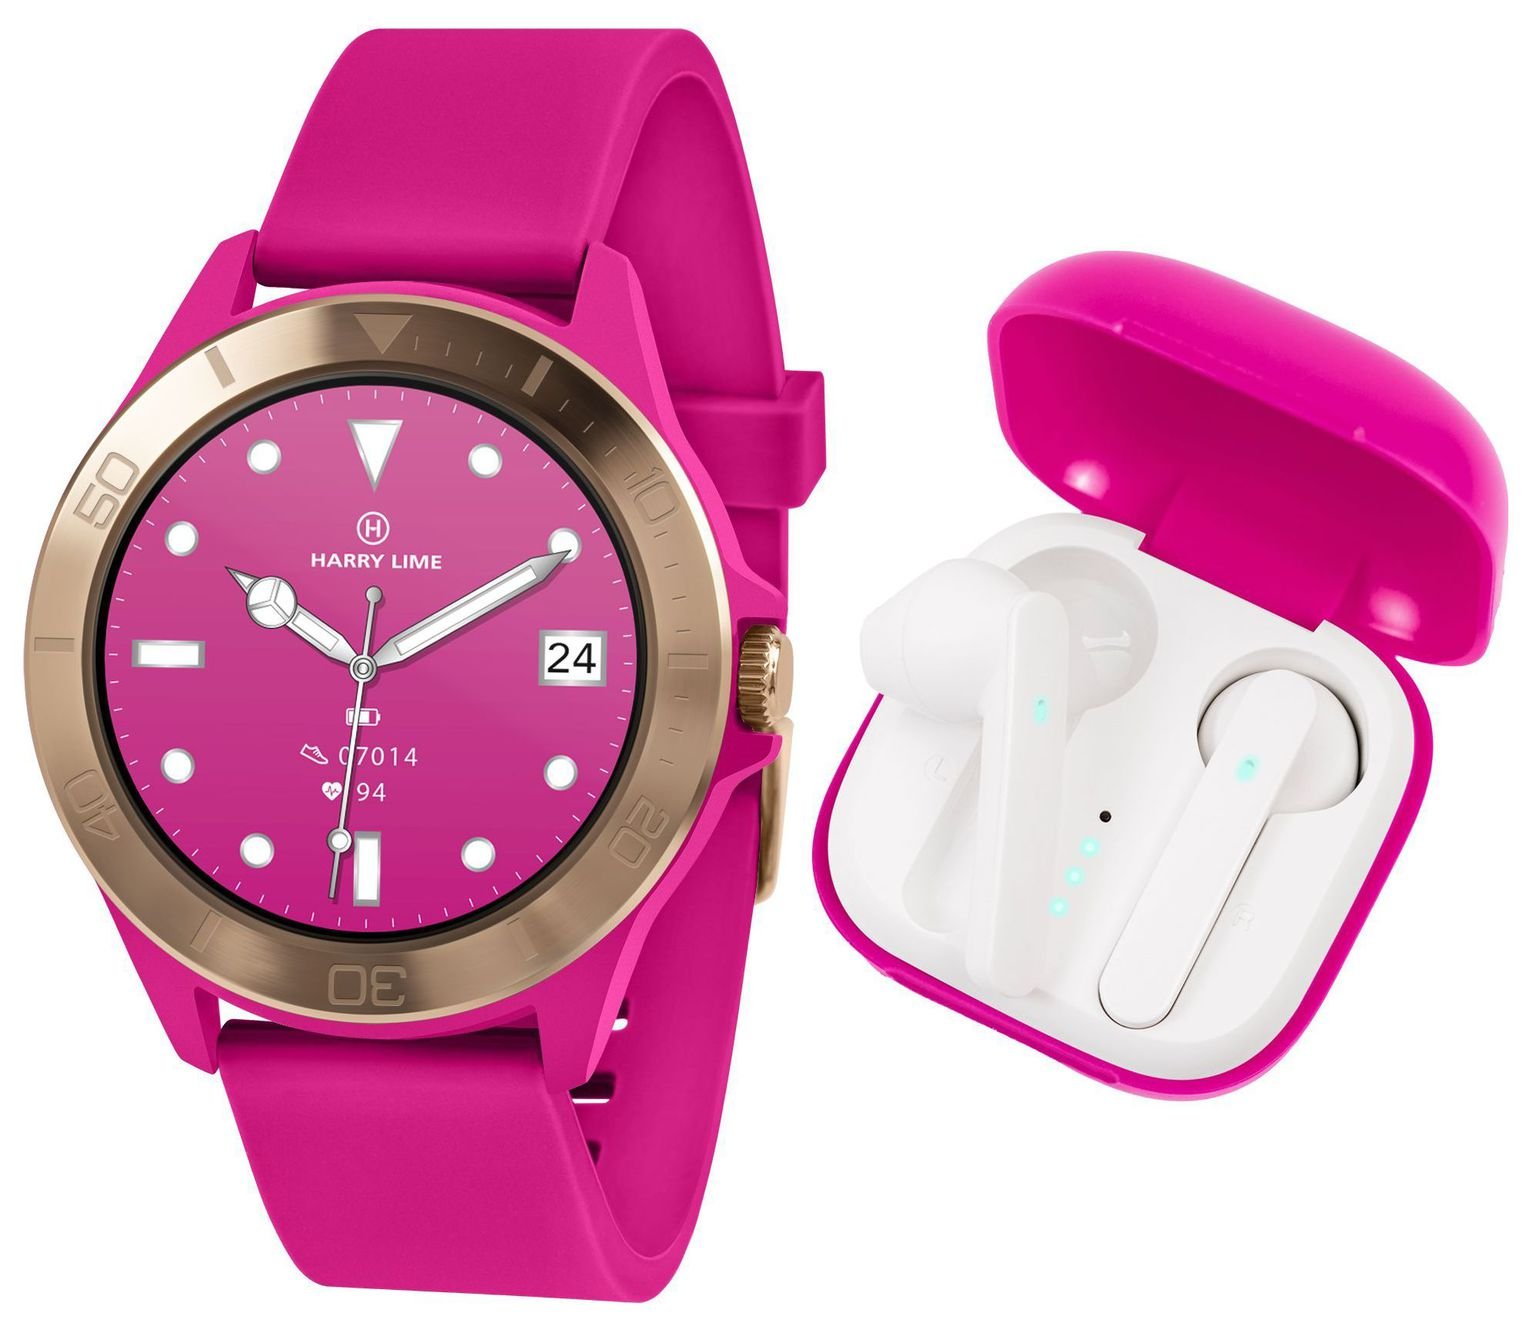 Harry Lime Pink Smart Watch and Earbuds Set